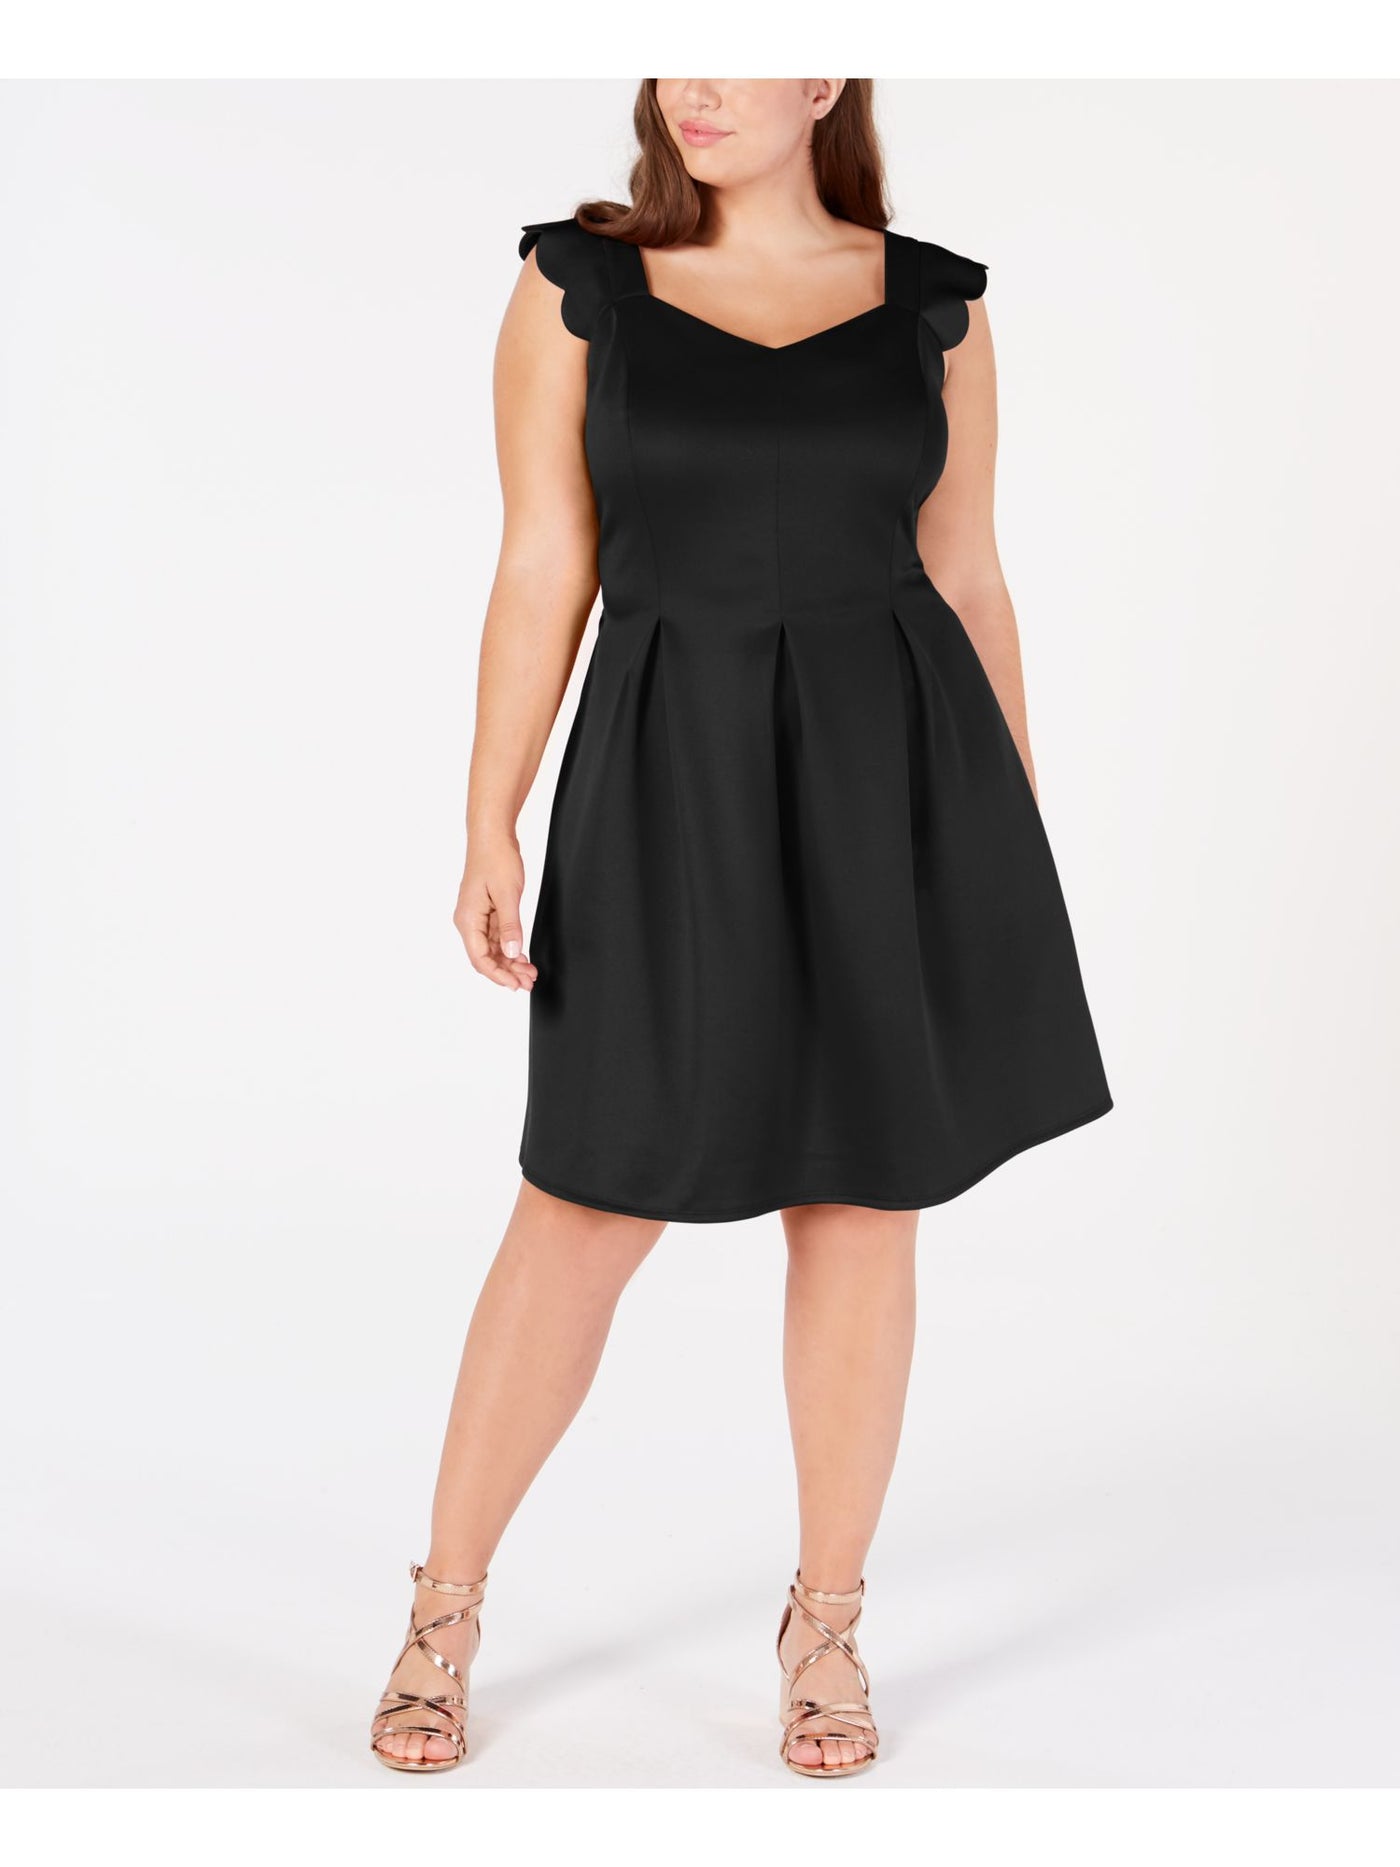 MONTEAU Womens Black Sleeveless Queen Anne Neckline Above The Knee Formal Fit + Flare Dress 2X